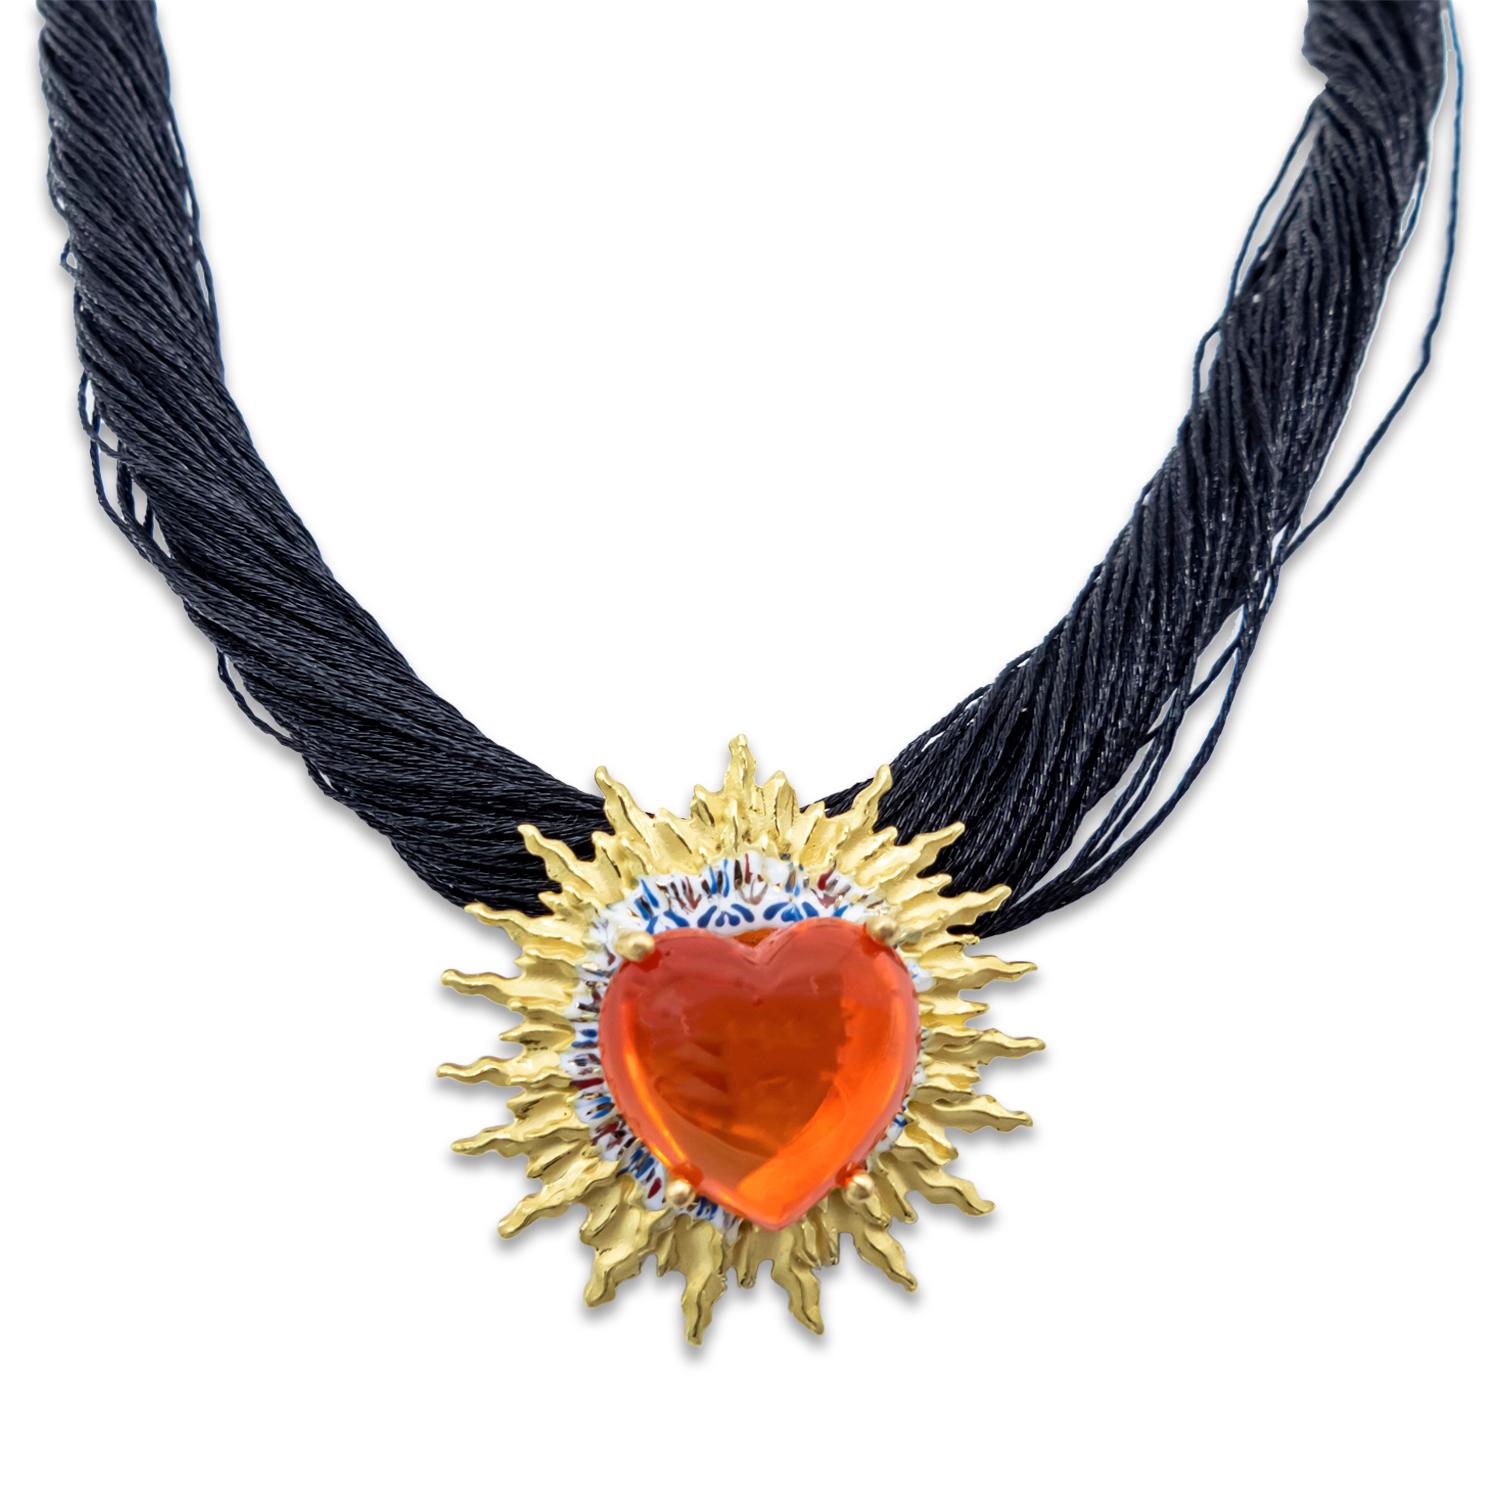 21st Century 18 Karat Yellow Gold Necklace Heart Fire Opal Fire Enamel Star Spanish Mystic  

18 Karat Gold necklace with fire enamels and a 16'33 cts fire opal carved in the shape of a heart (17 mm x 17 mm) with black silk threads and magnet